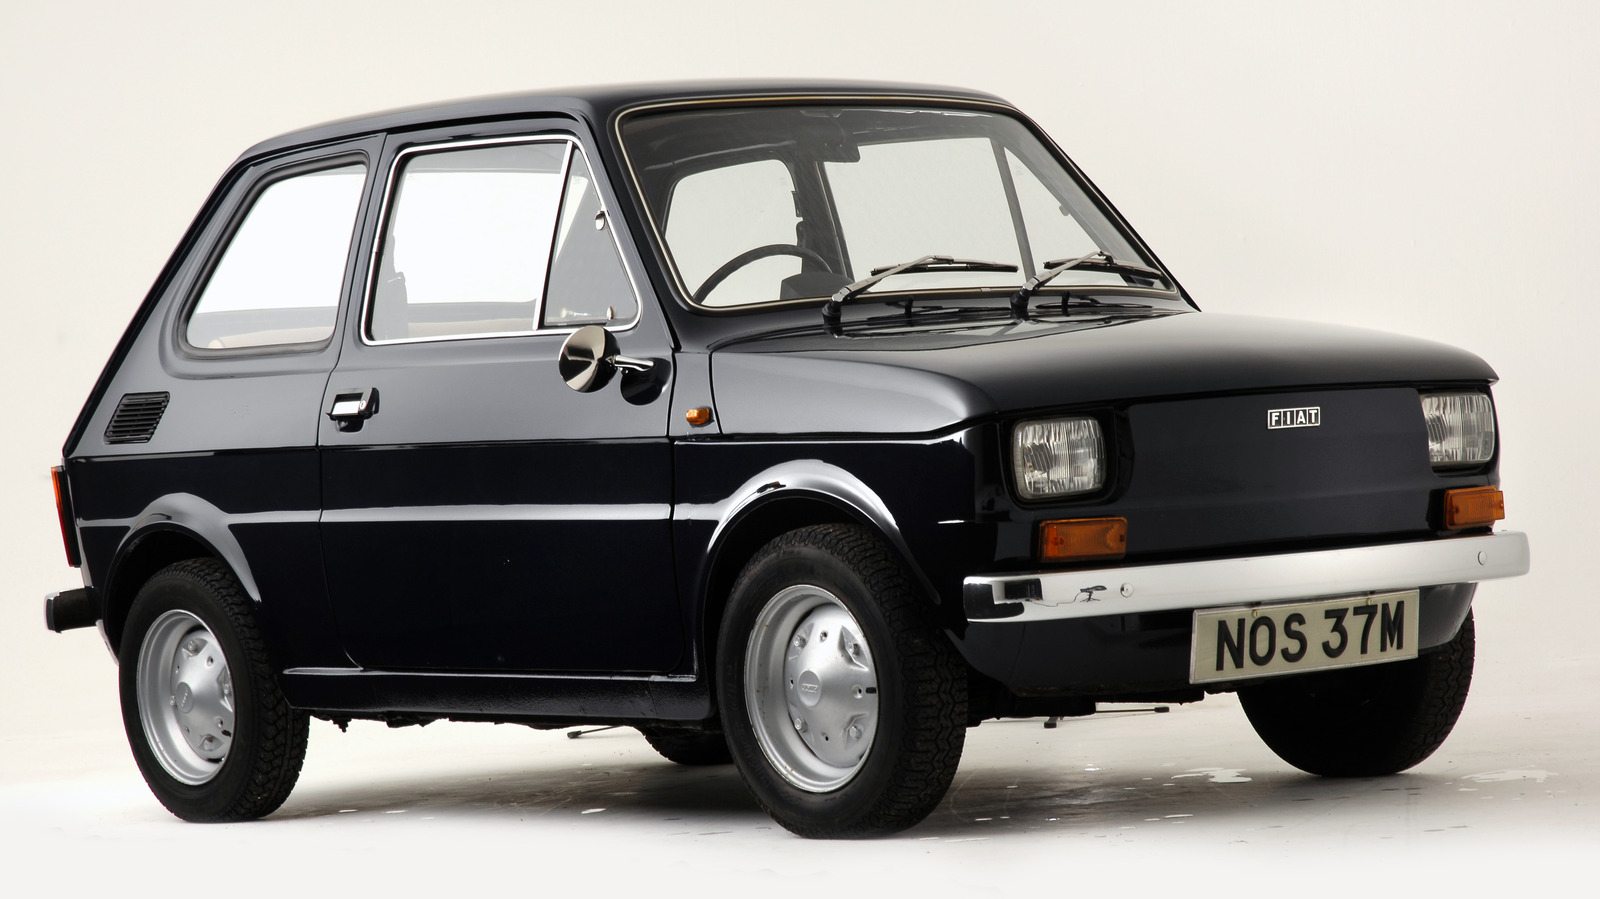 Why The Incredibly Popular Fiat 126P Was Banned In The USA